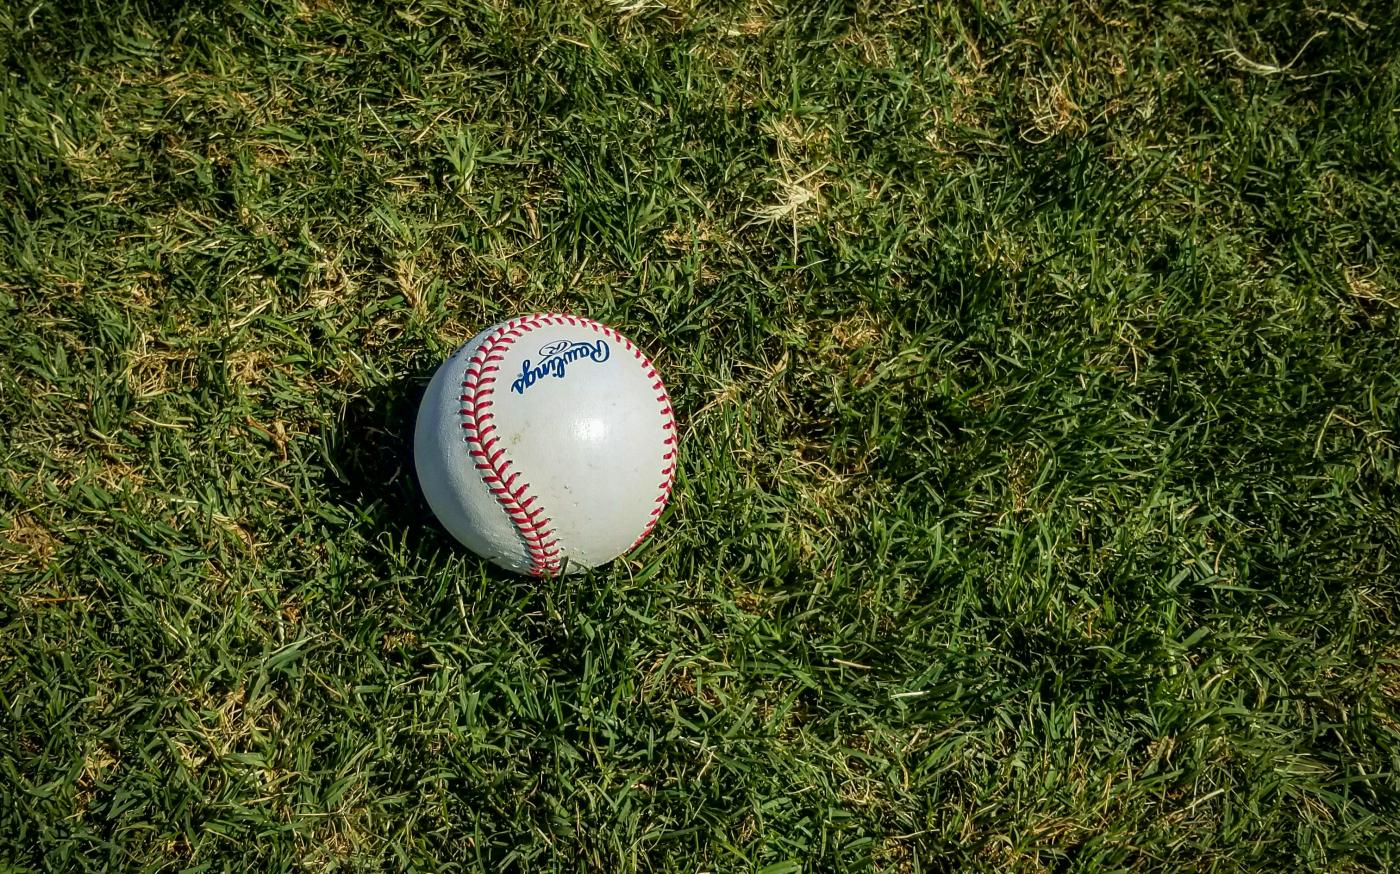 white and red baseball on green grass by Mick Haupt courtesy of Unsplash.